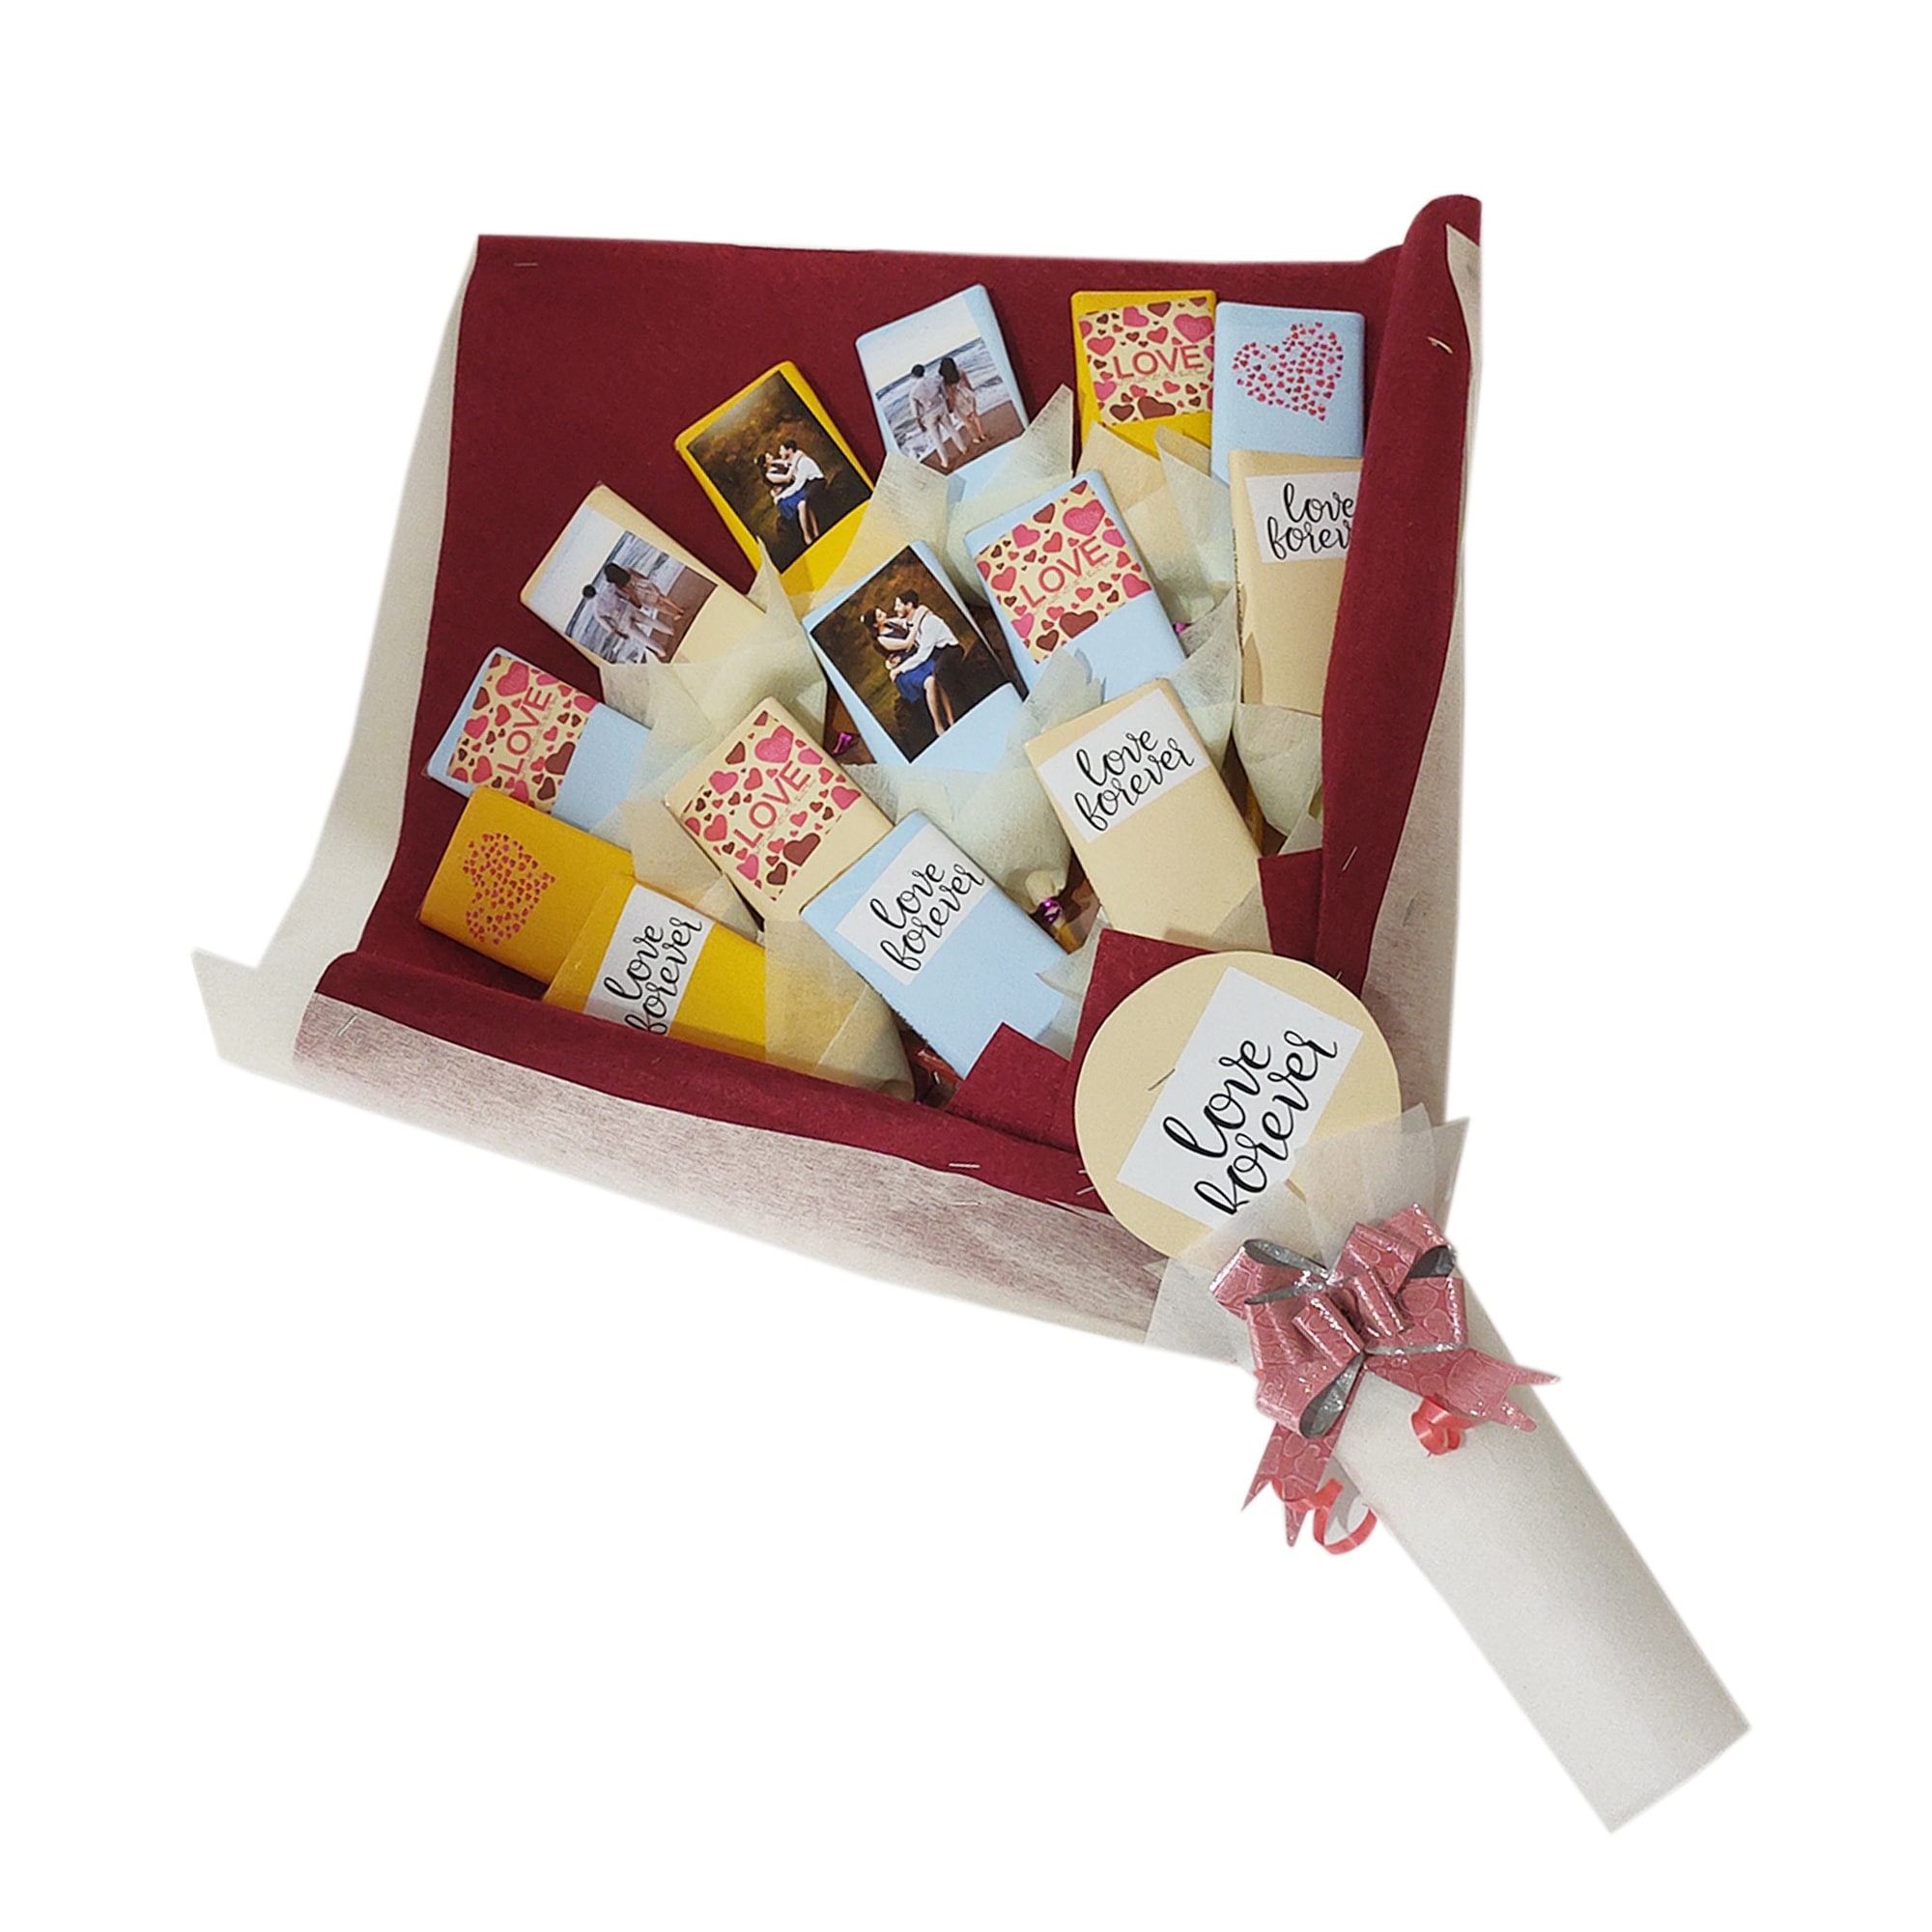 Chocolate Gifts Basket to India, Low Cost, Free Delivery